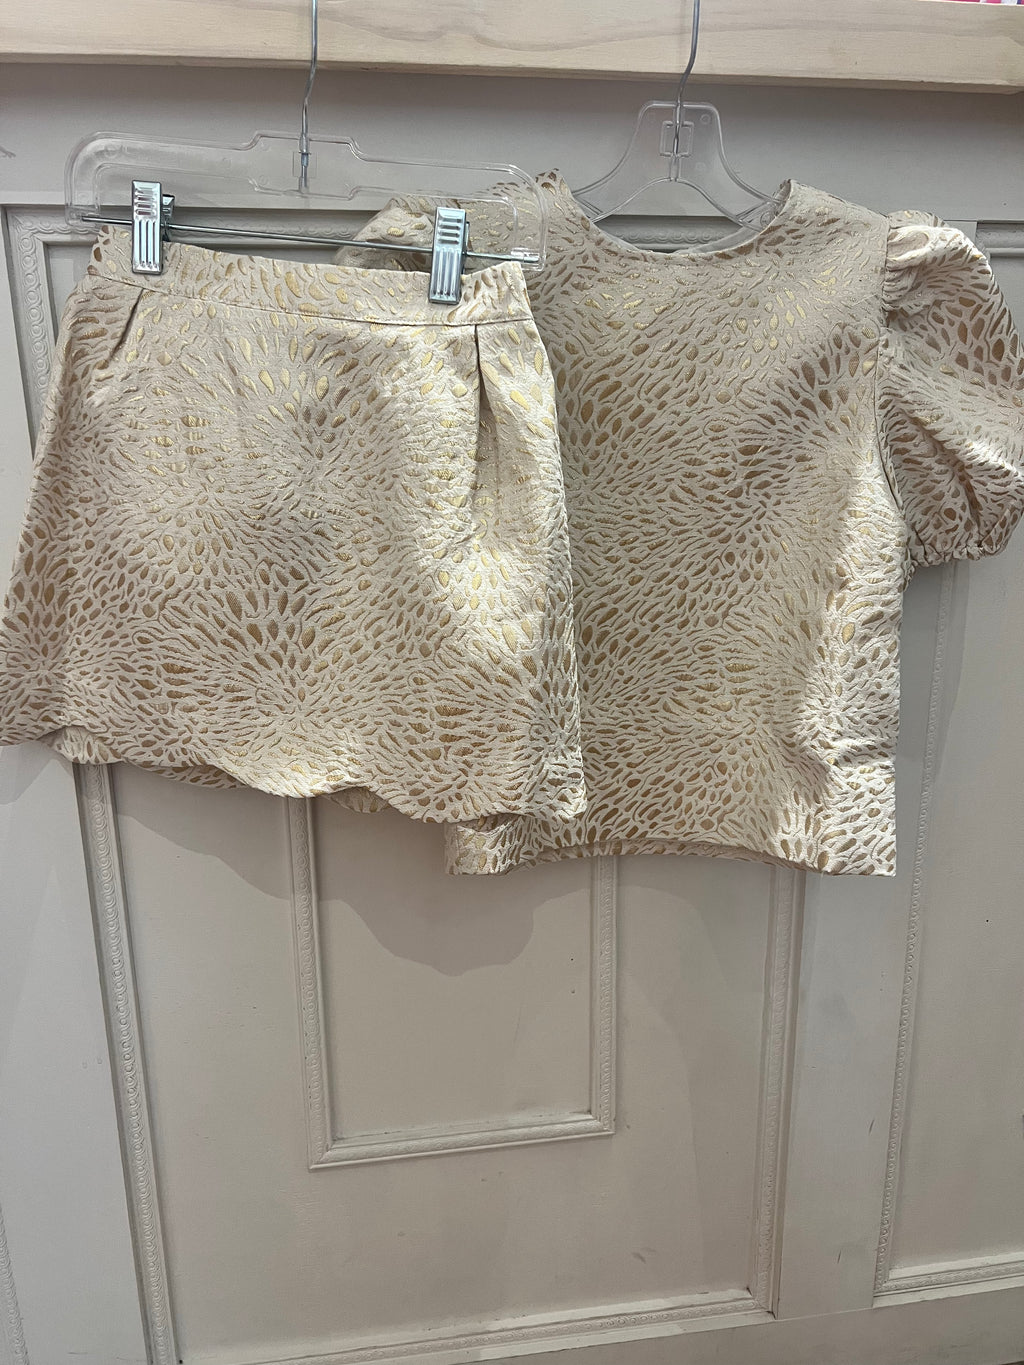 Tillie Top and Seabrook Scalloped Skirt-Golden Isle